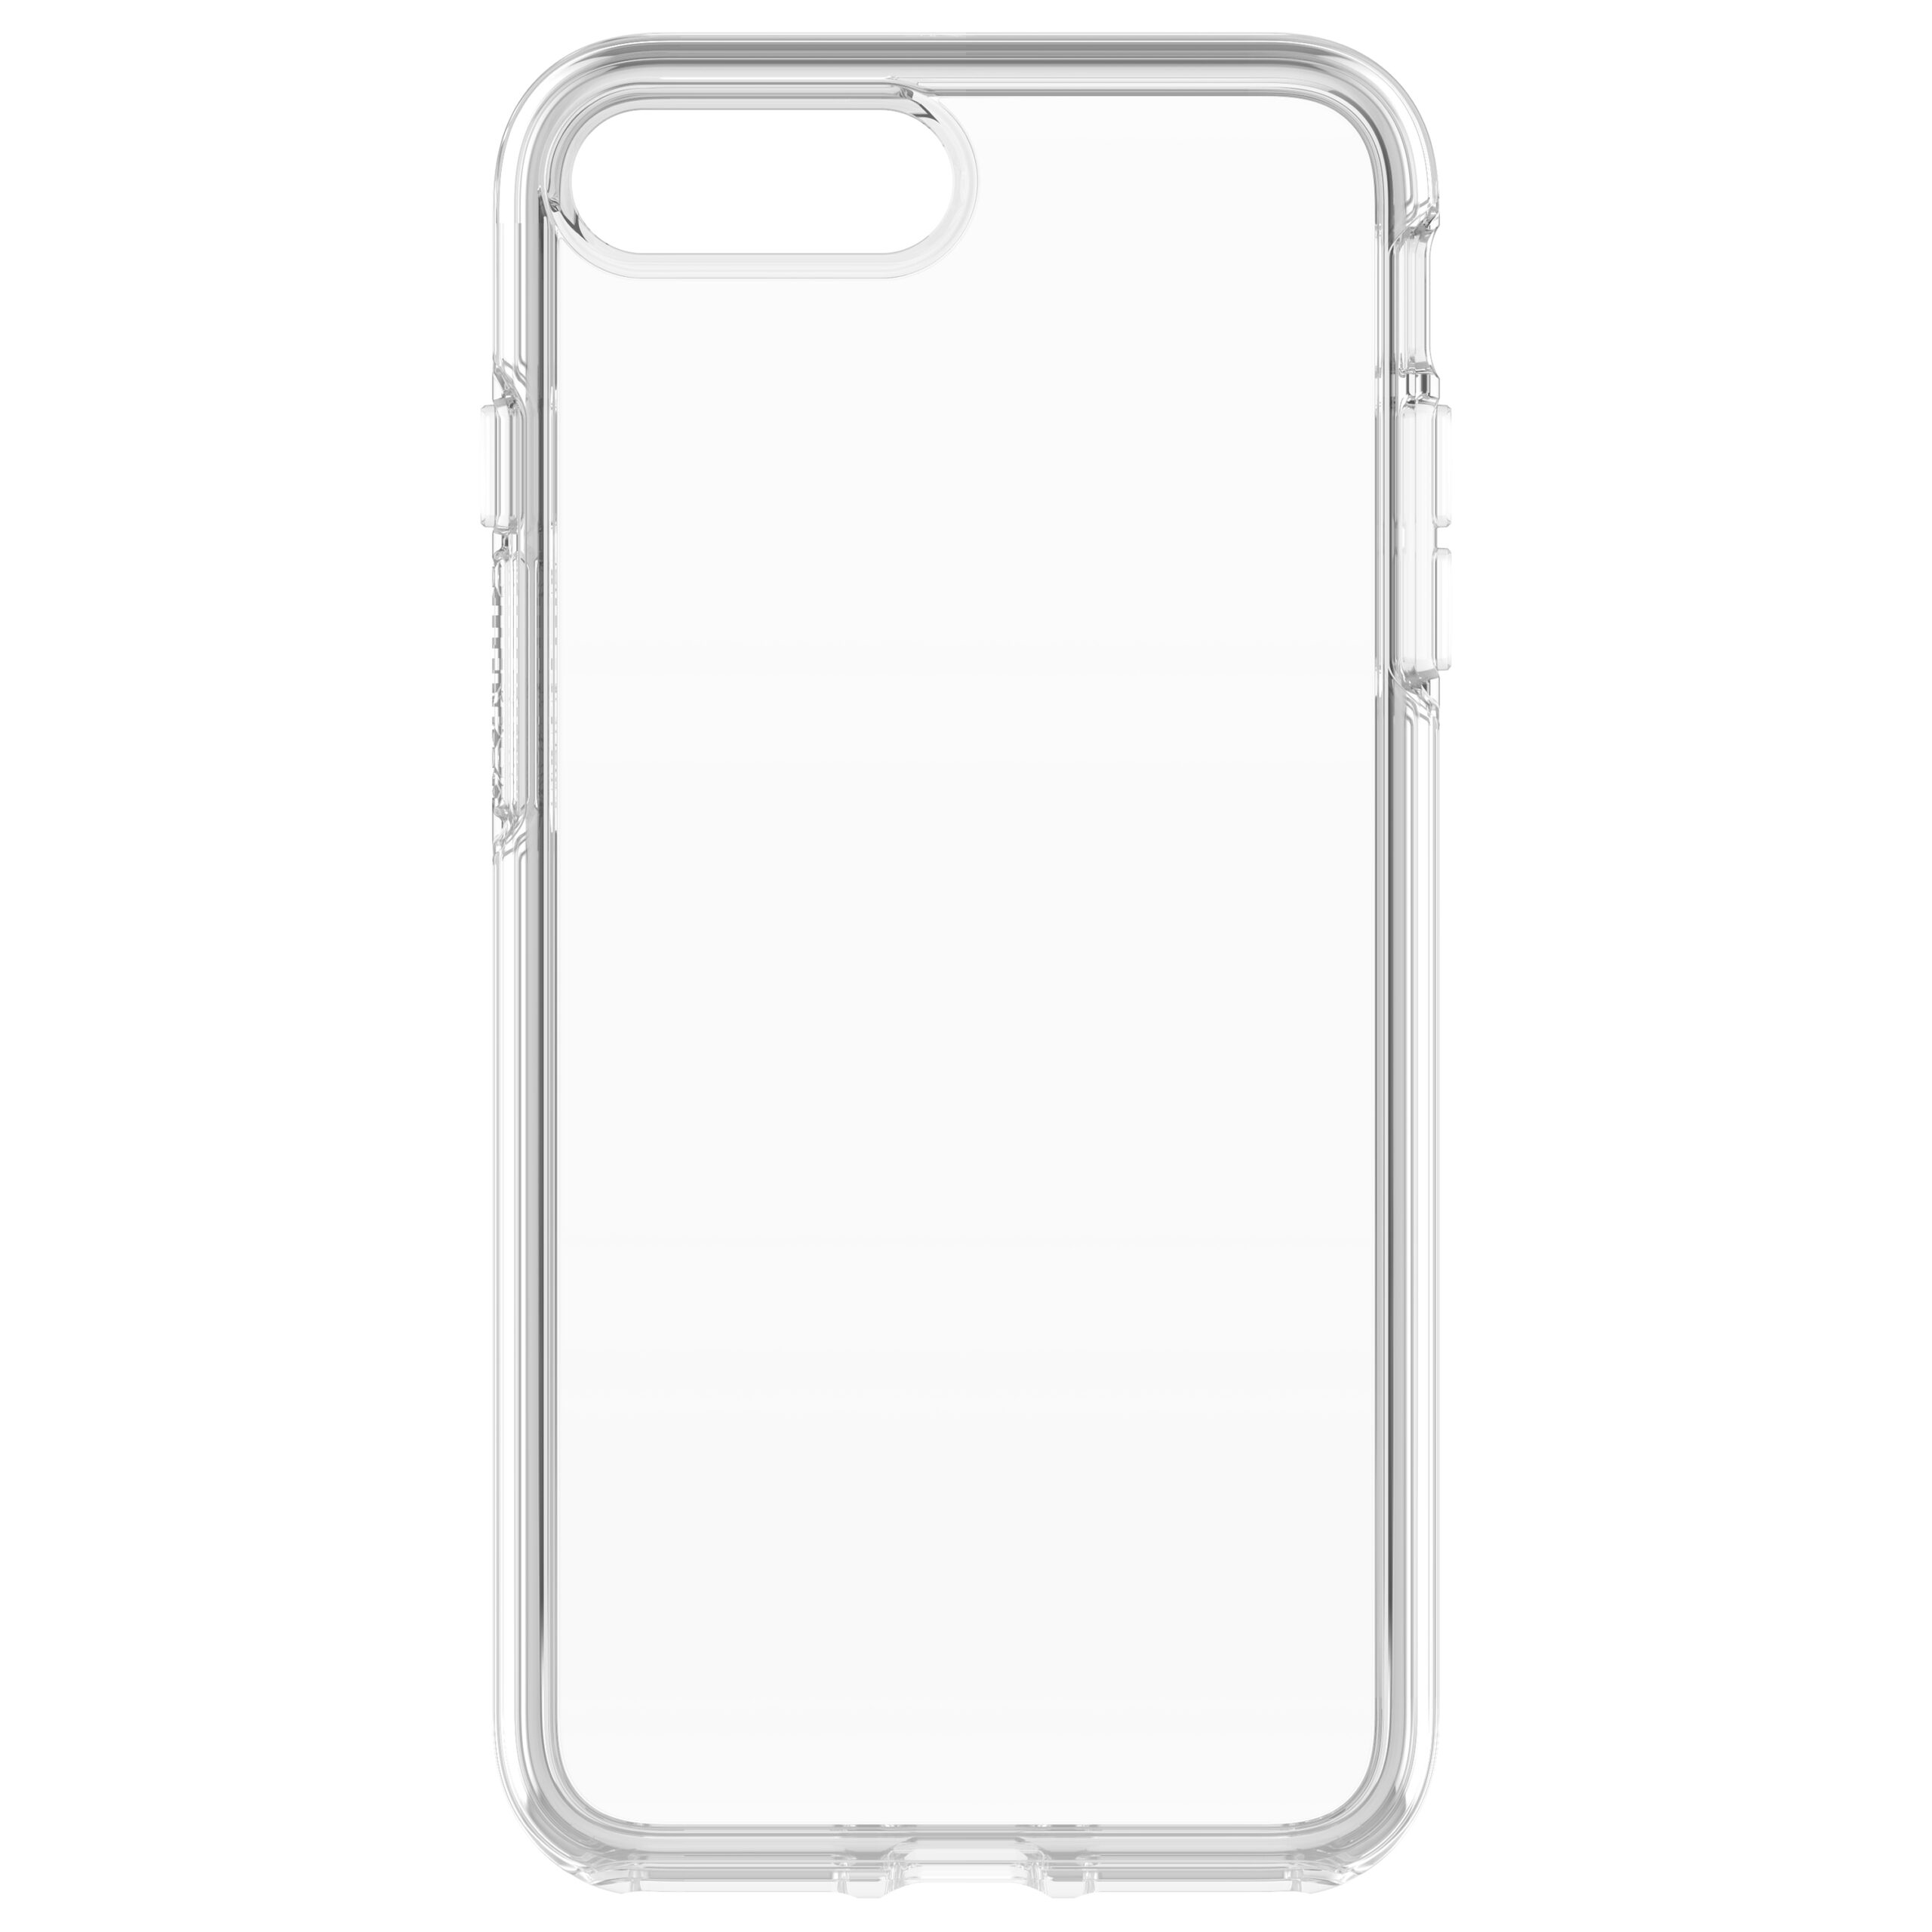 Otterbox Symmetry Clear Otterbox Retail 77 53959 5060256388227